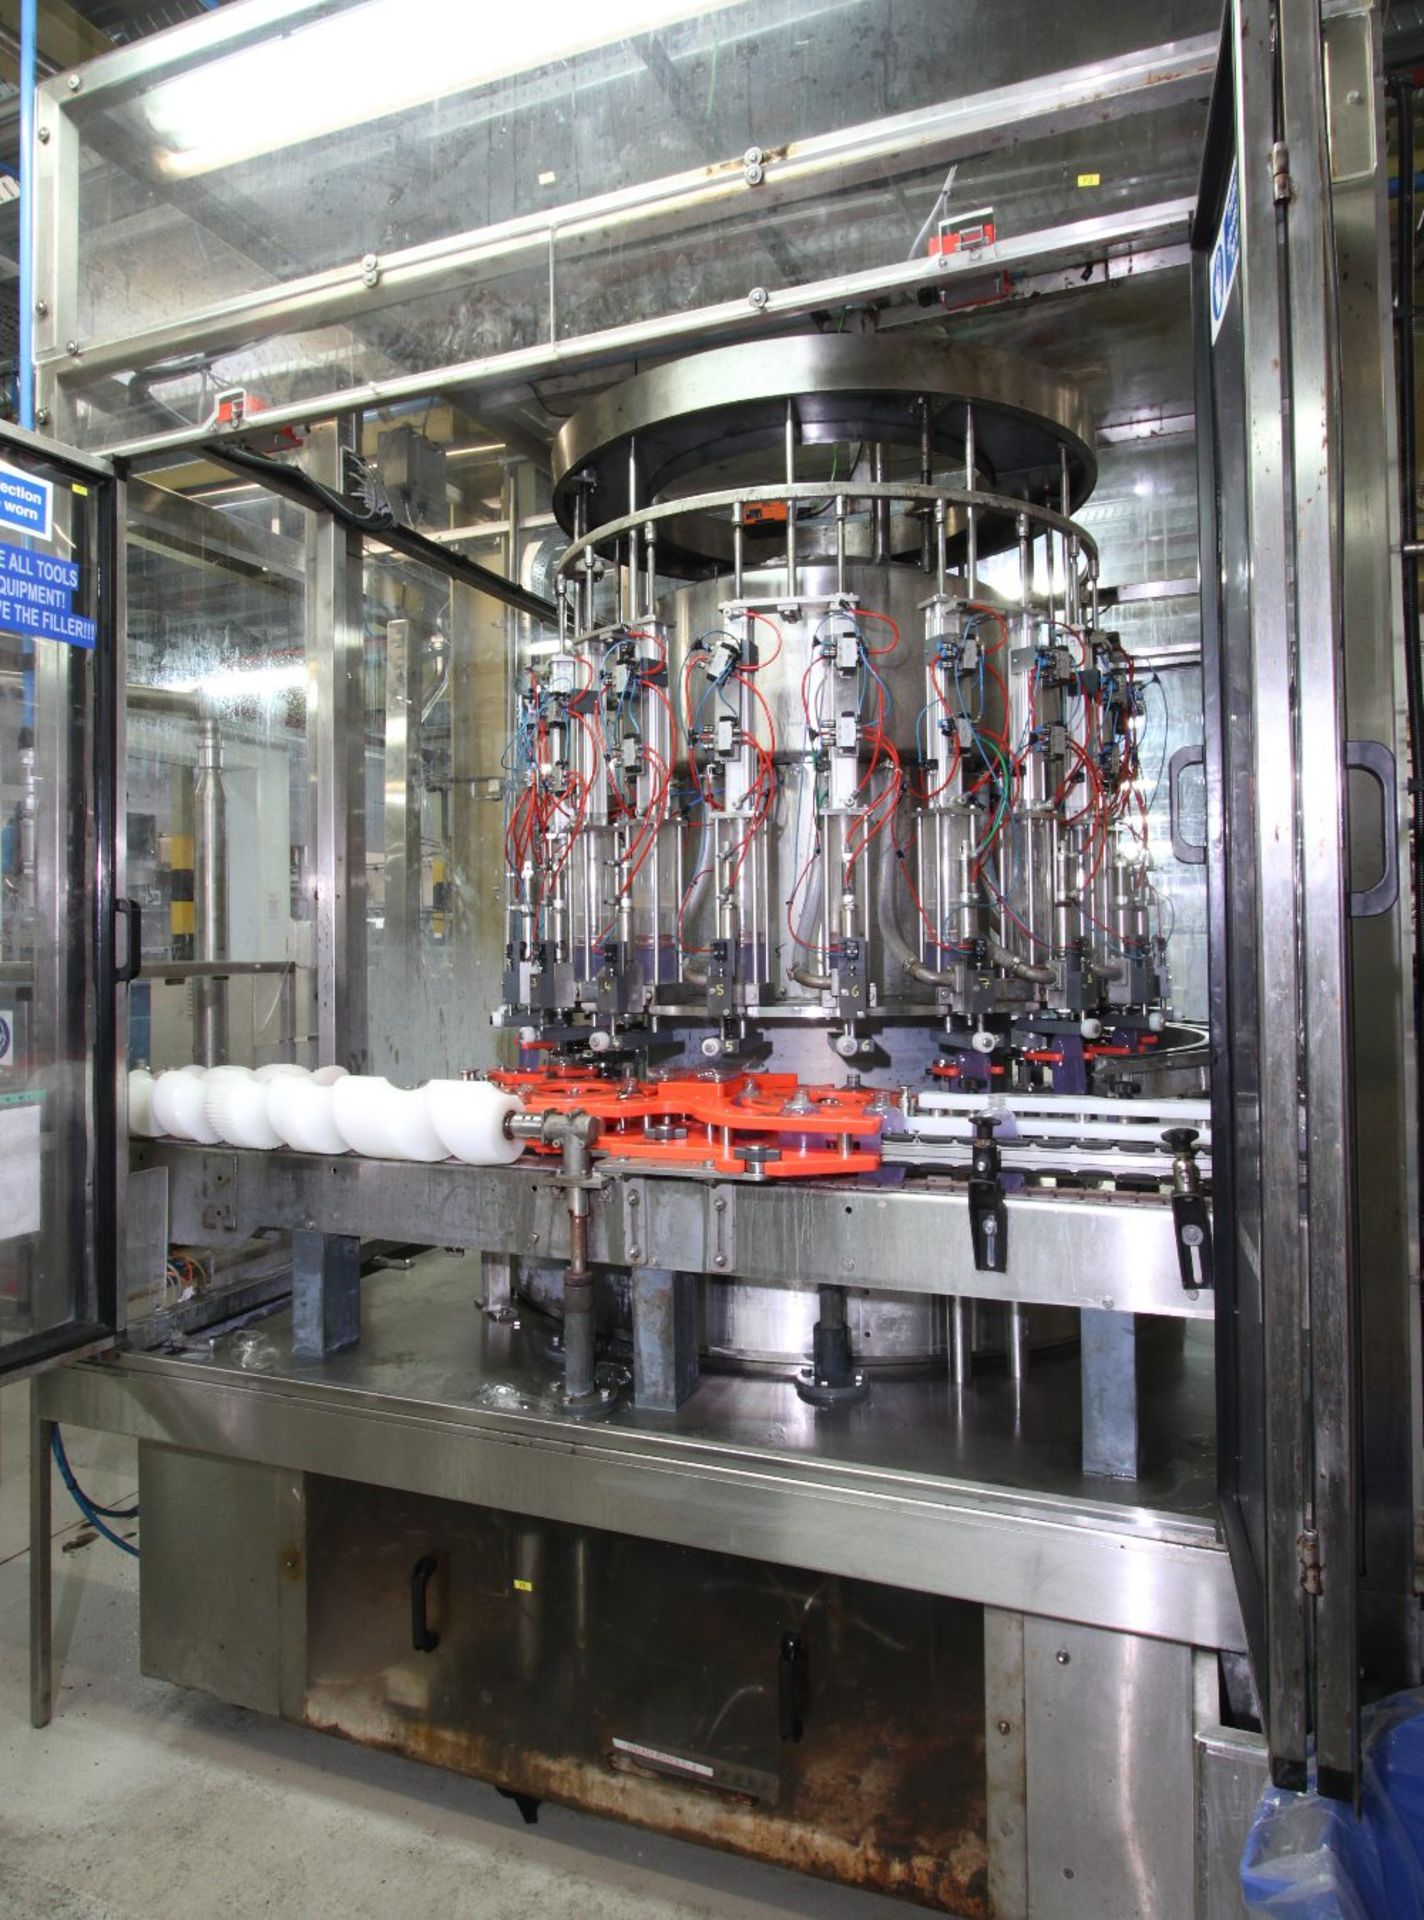 Contents Of World Class Manufacturer's Bottling Line. - Image 35 of 87